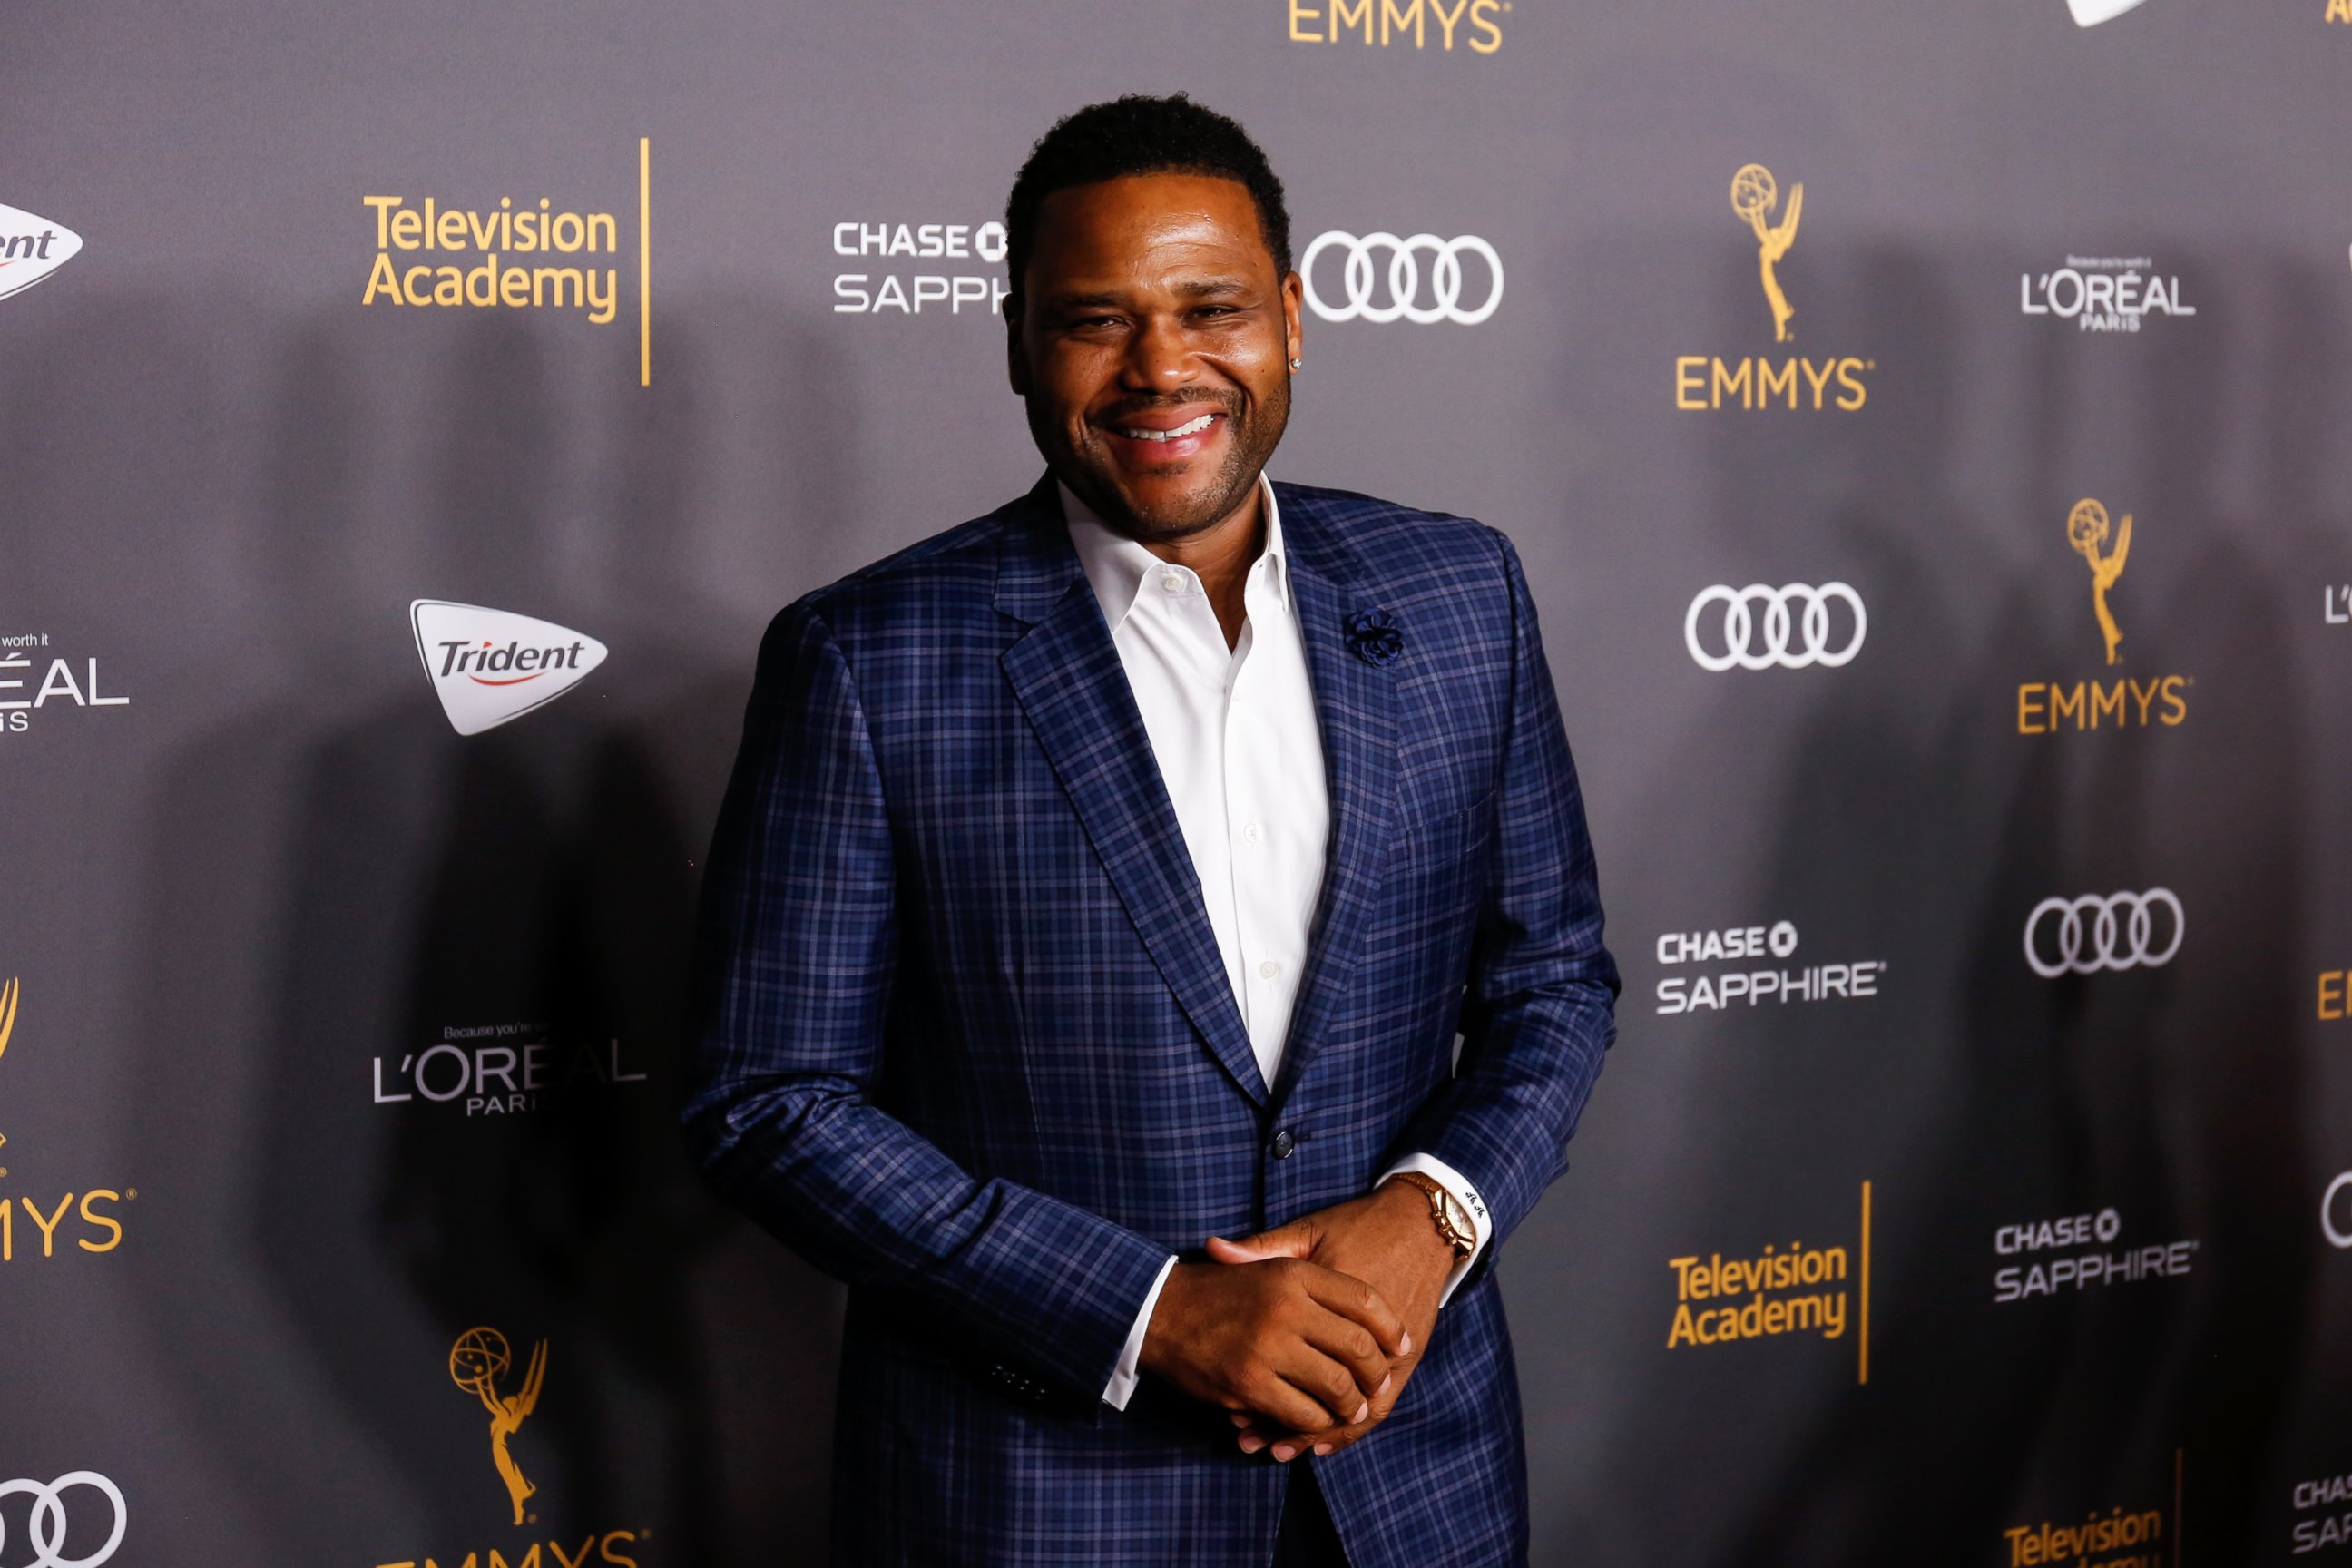 PHOTO: Anthony Anderson arrives at the 2016 Primetime Emmy Awards Performer Nominees Reception at the Pacific Design Center, on Sept. 16, 2016, in West Hollywood, California.